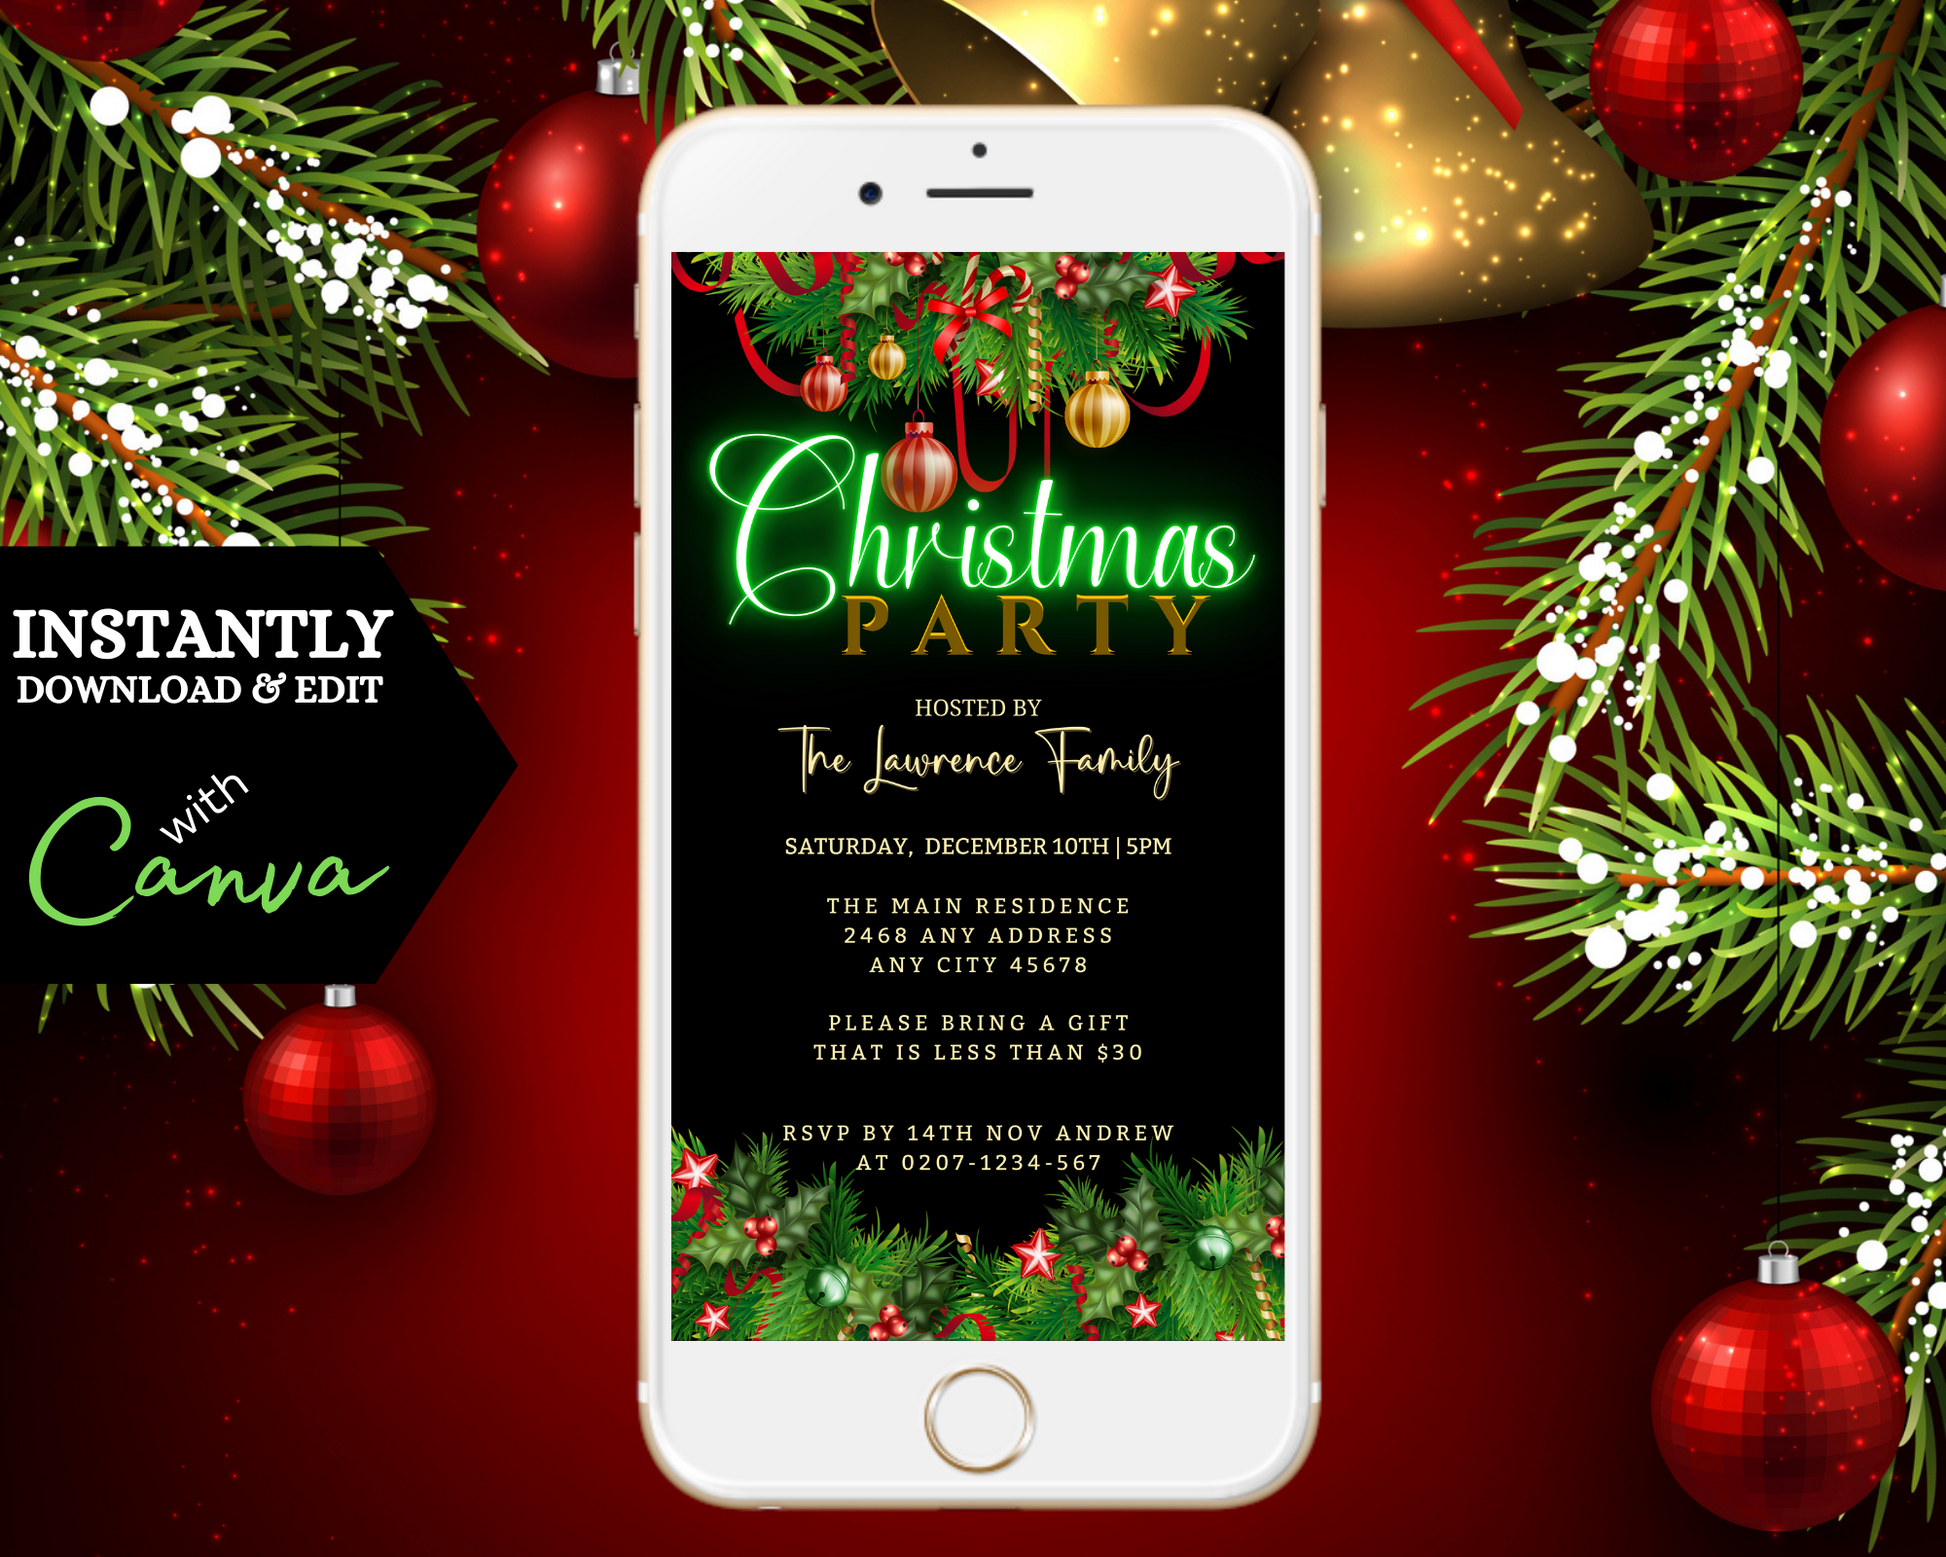 Green Neon Ornaments Border Christmas Party Evite displayed on a white cell phone. Editable and customizable invitation template for digital use via Canva.